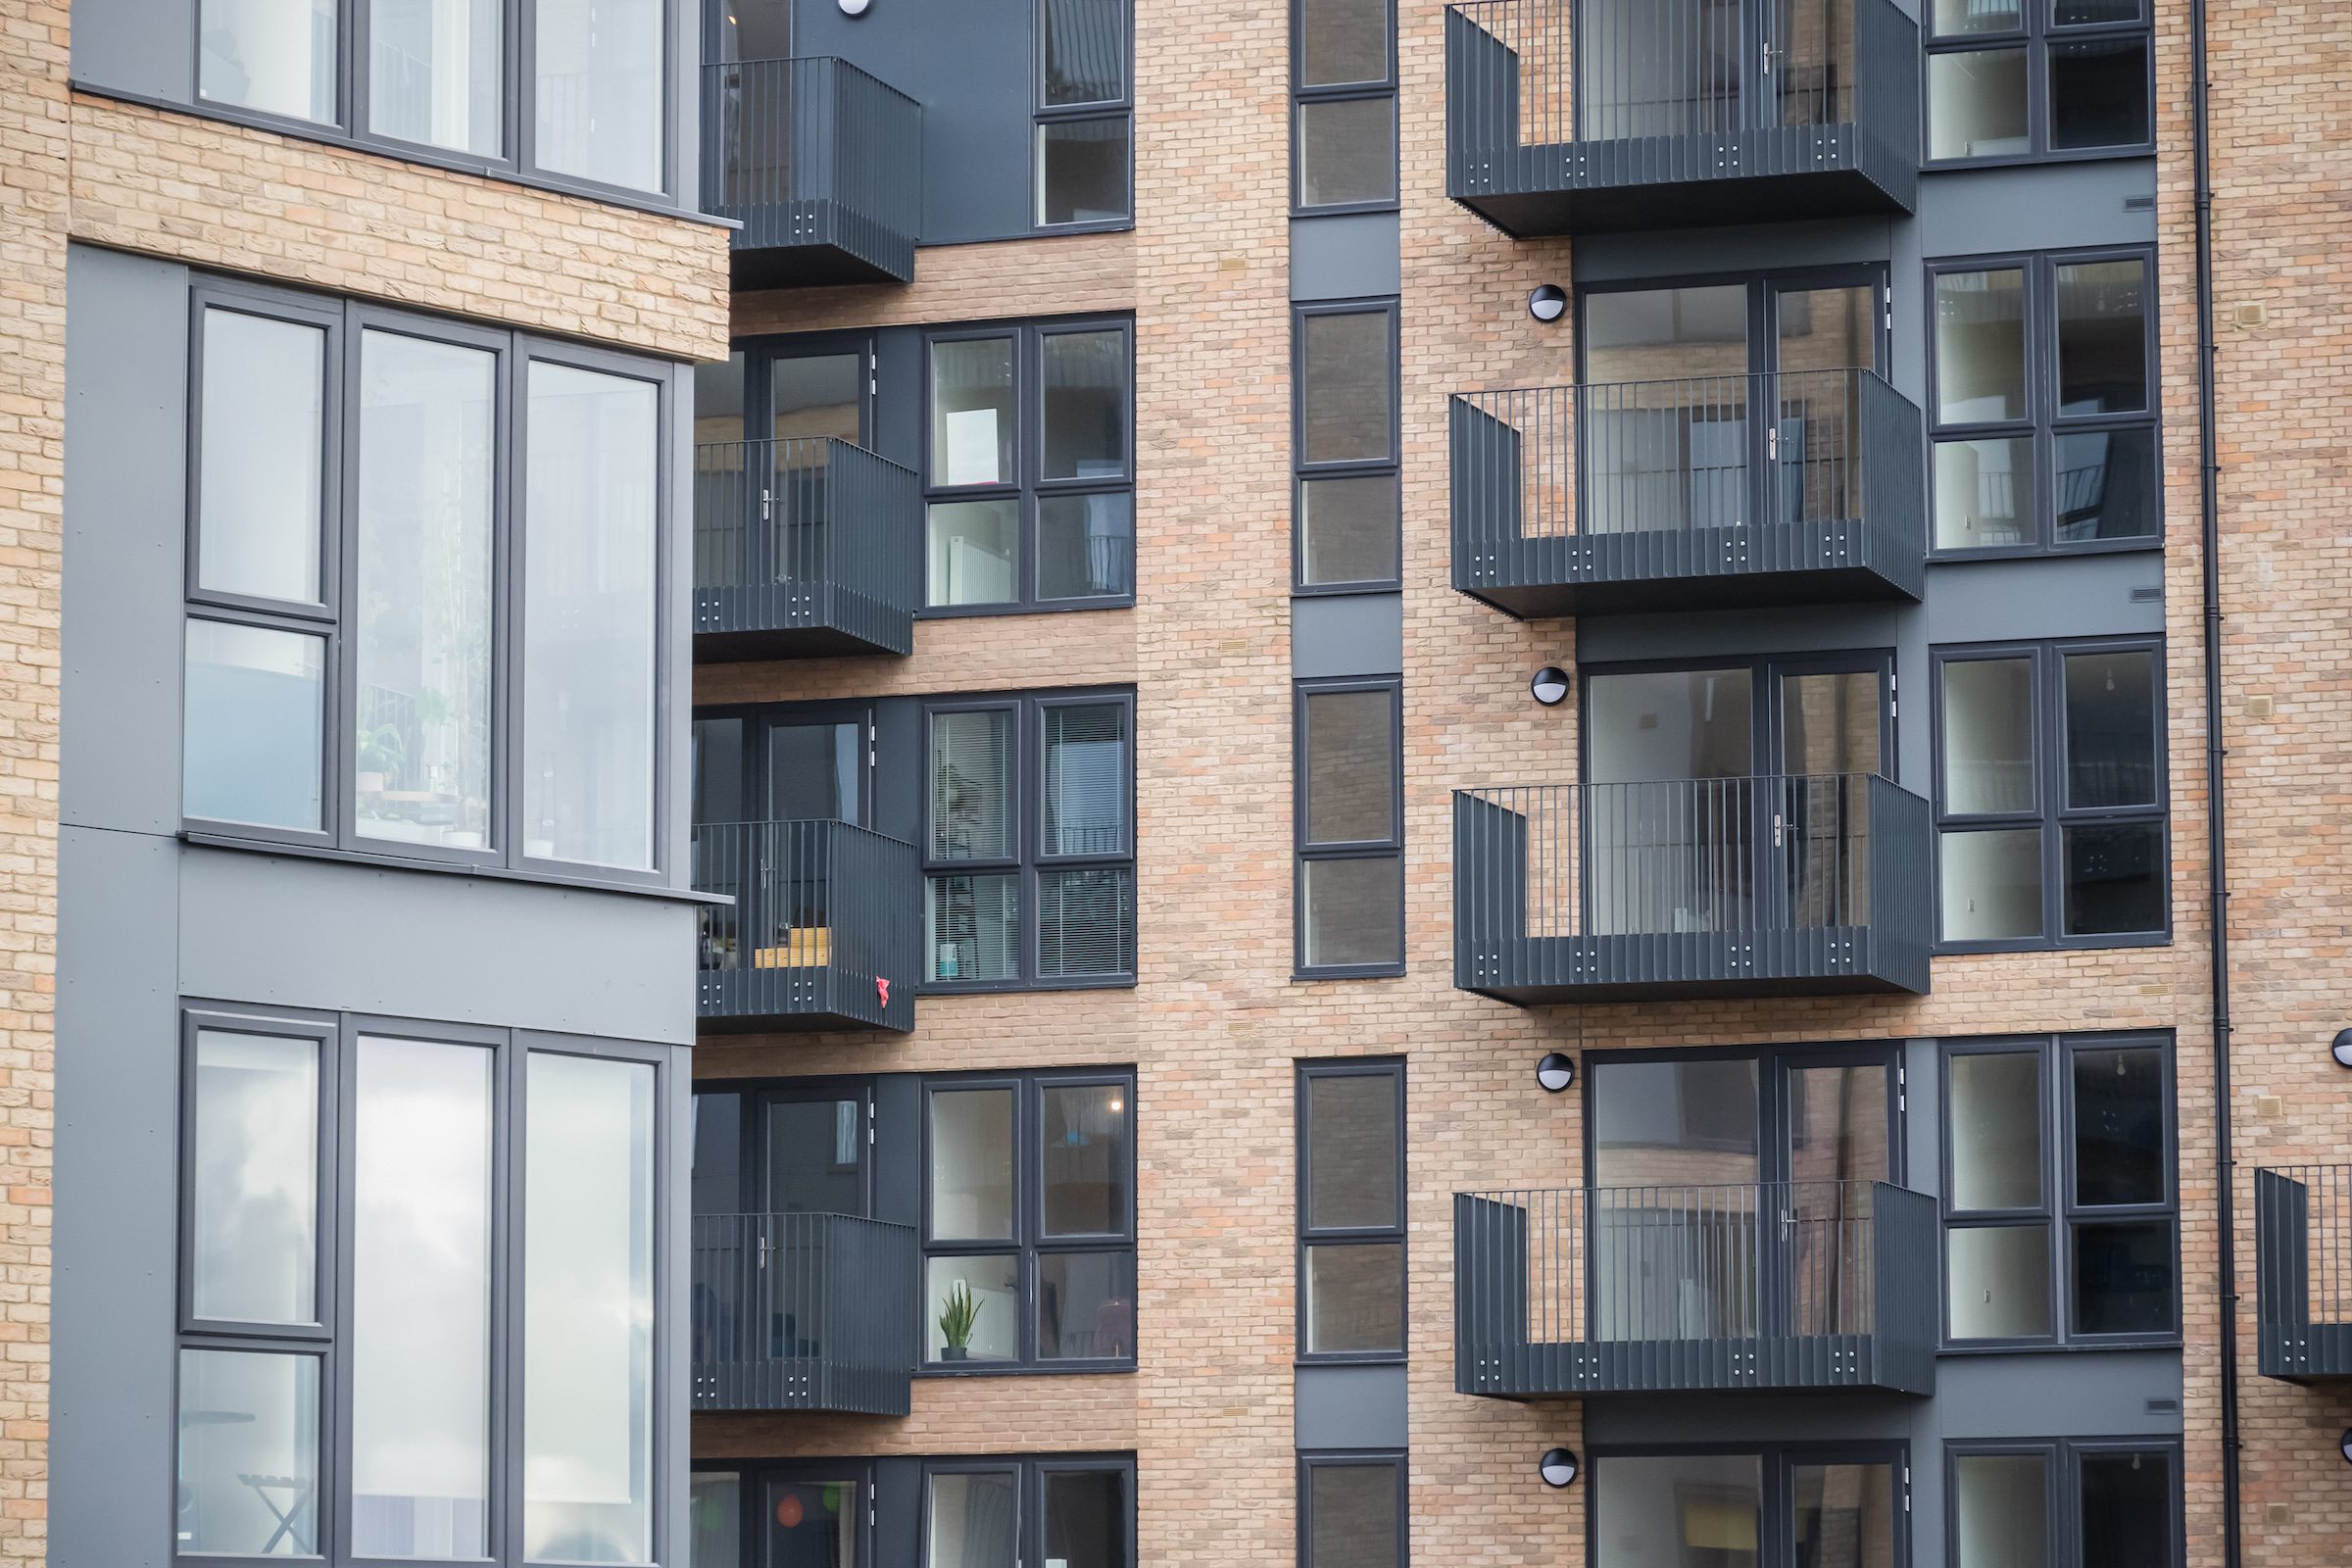 aluprof uk doors and windows in a new apartment building